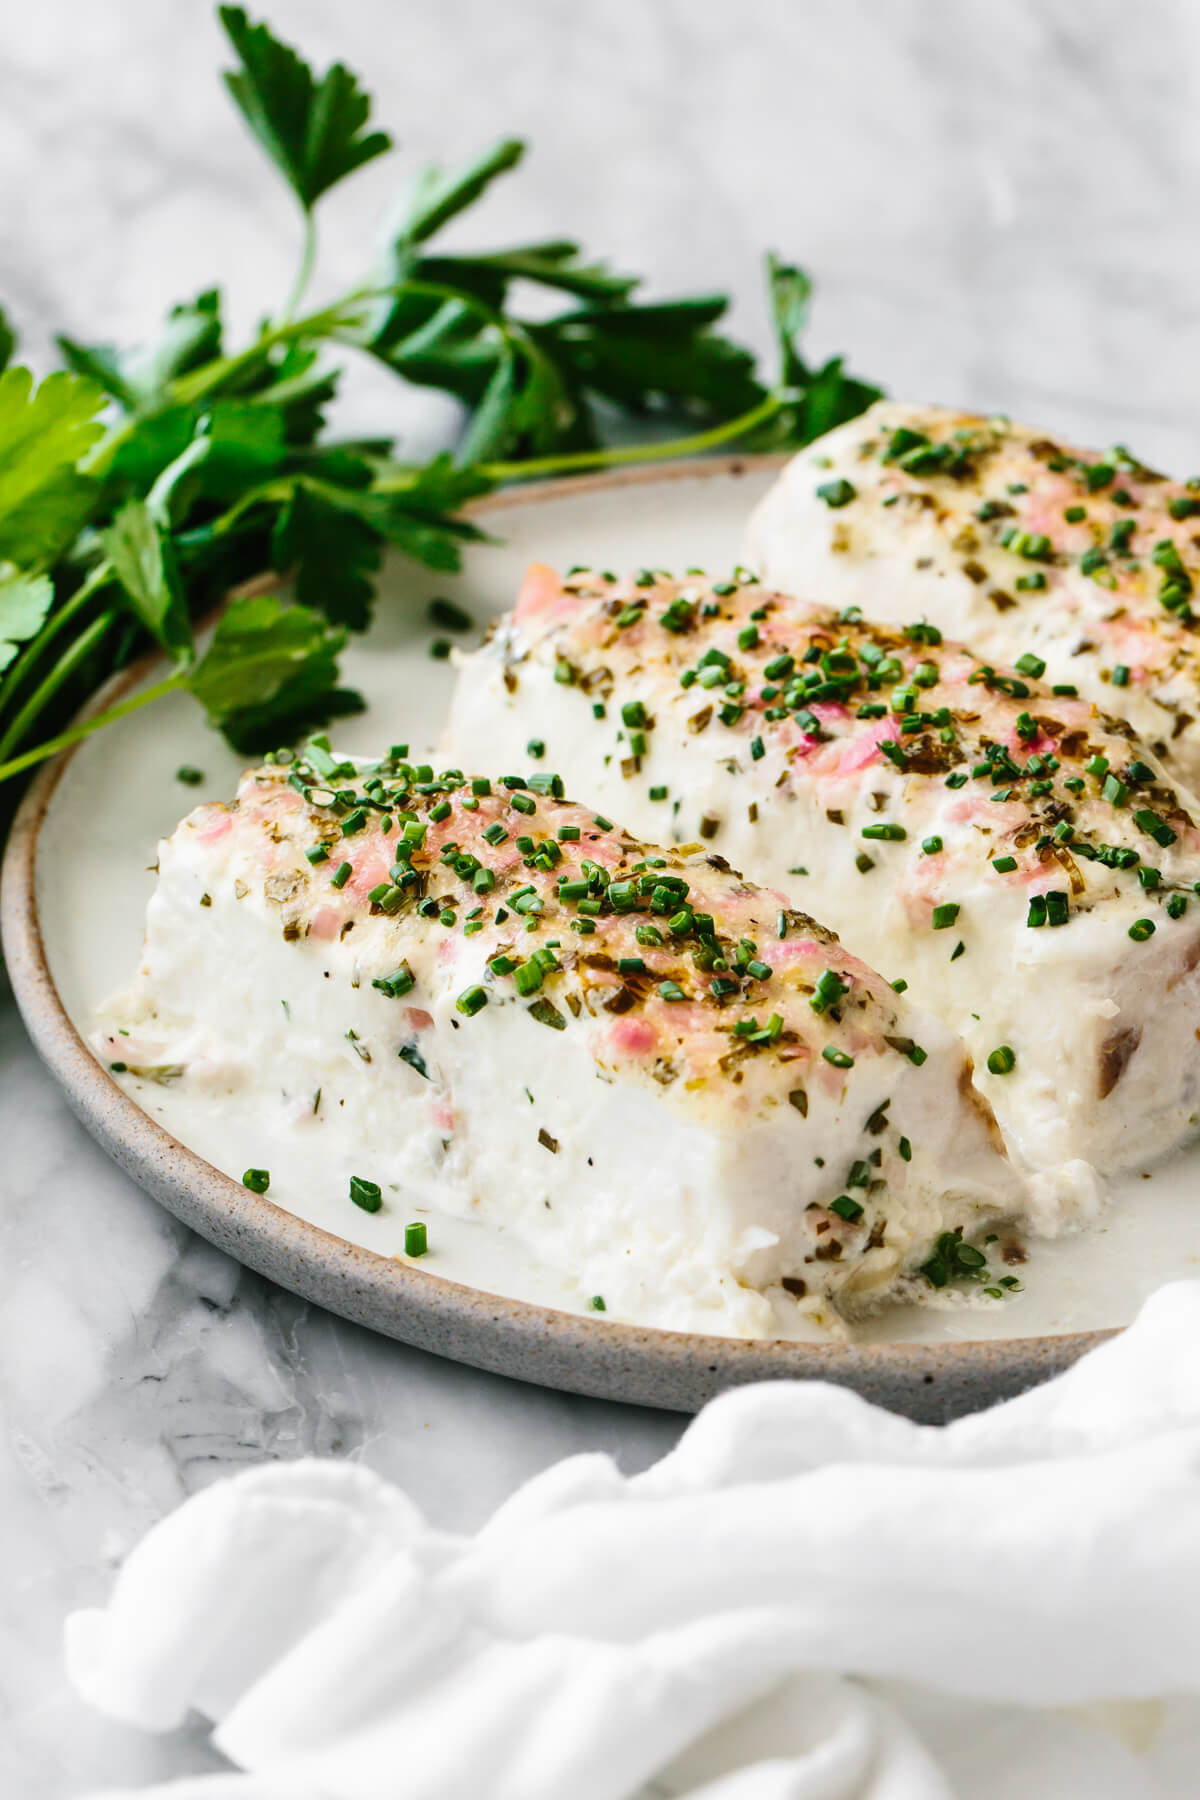 Baked halibut with herbed mayonnaise crust on a plate.